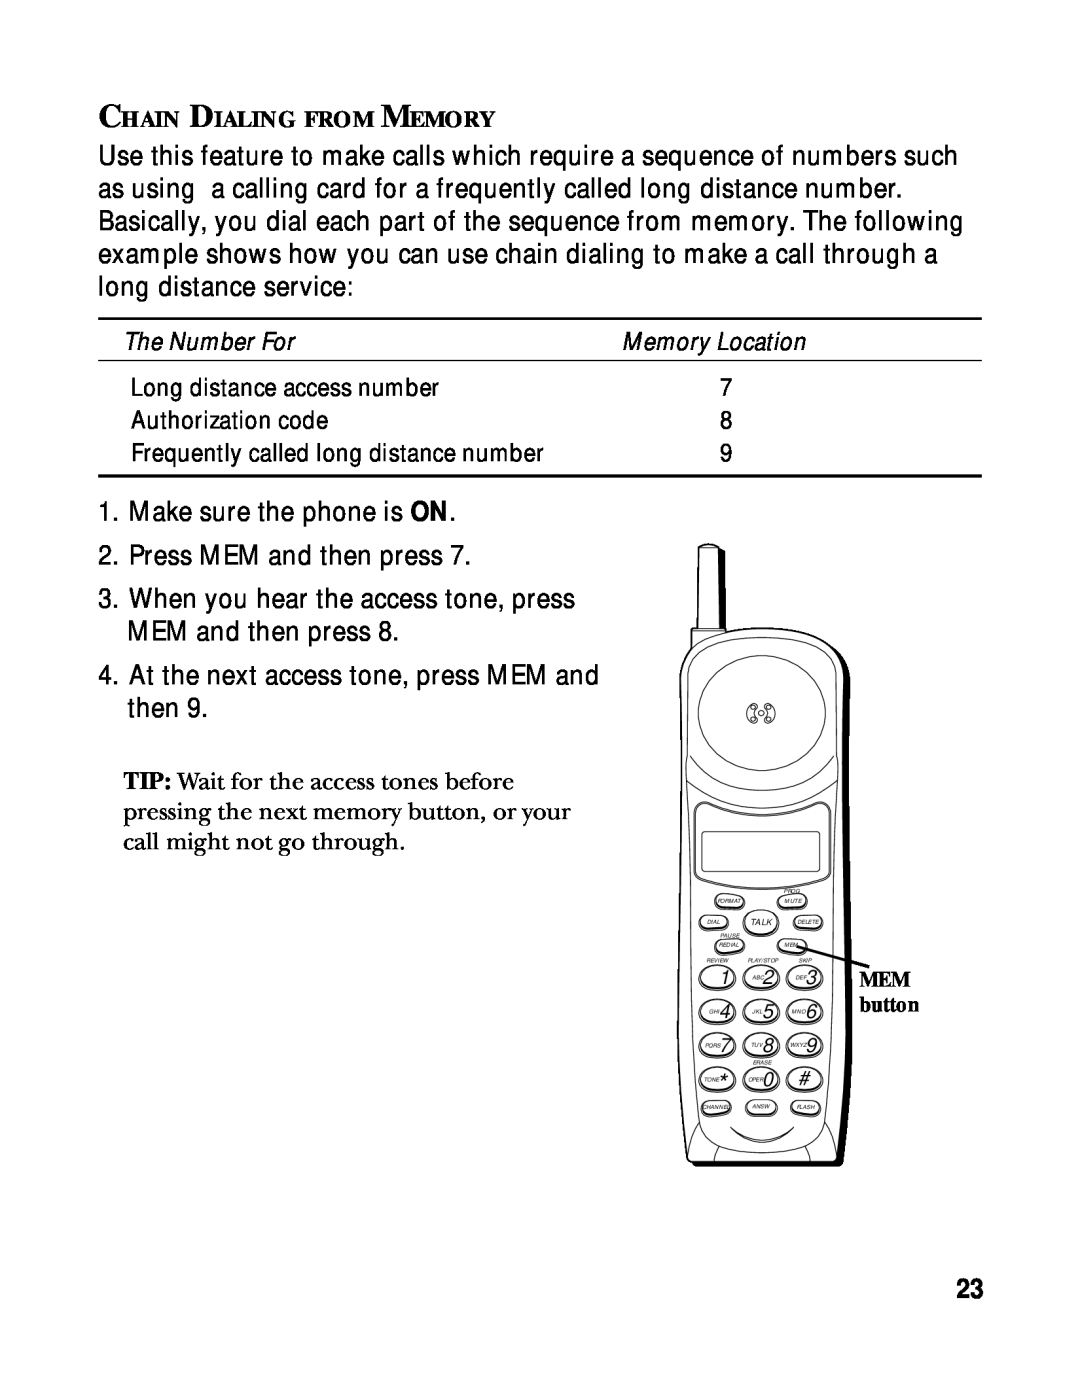 RCA 900 MHz manual Make sure the phone is ON 